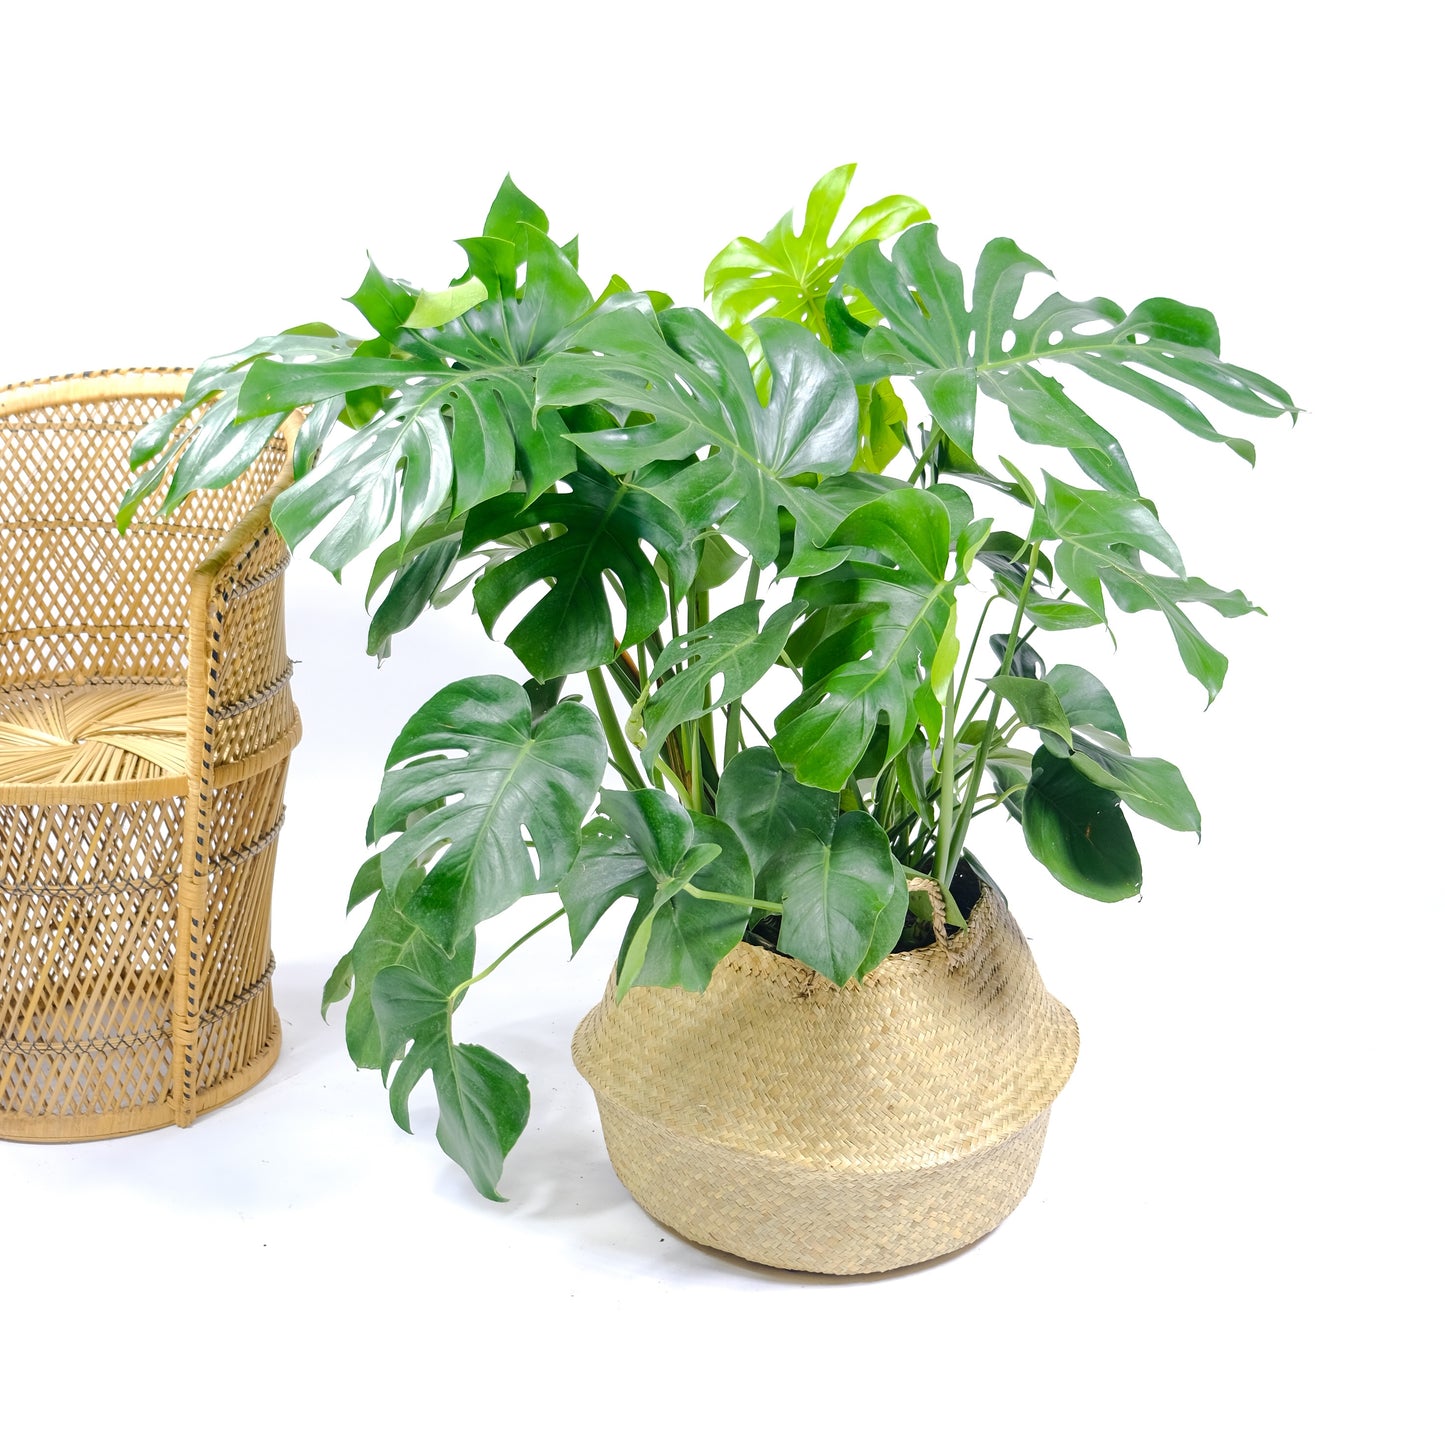 Swiss Cheese Plant, Split-Leaf Philodendron, Delicious monster, Mexican breadfruit, (Monstera deliciosa) in a 14 inch pot. Indoor plant for sale by Promise Supply for delivery and pickup in Toronto